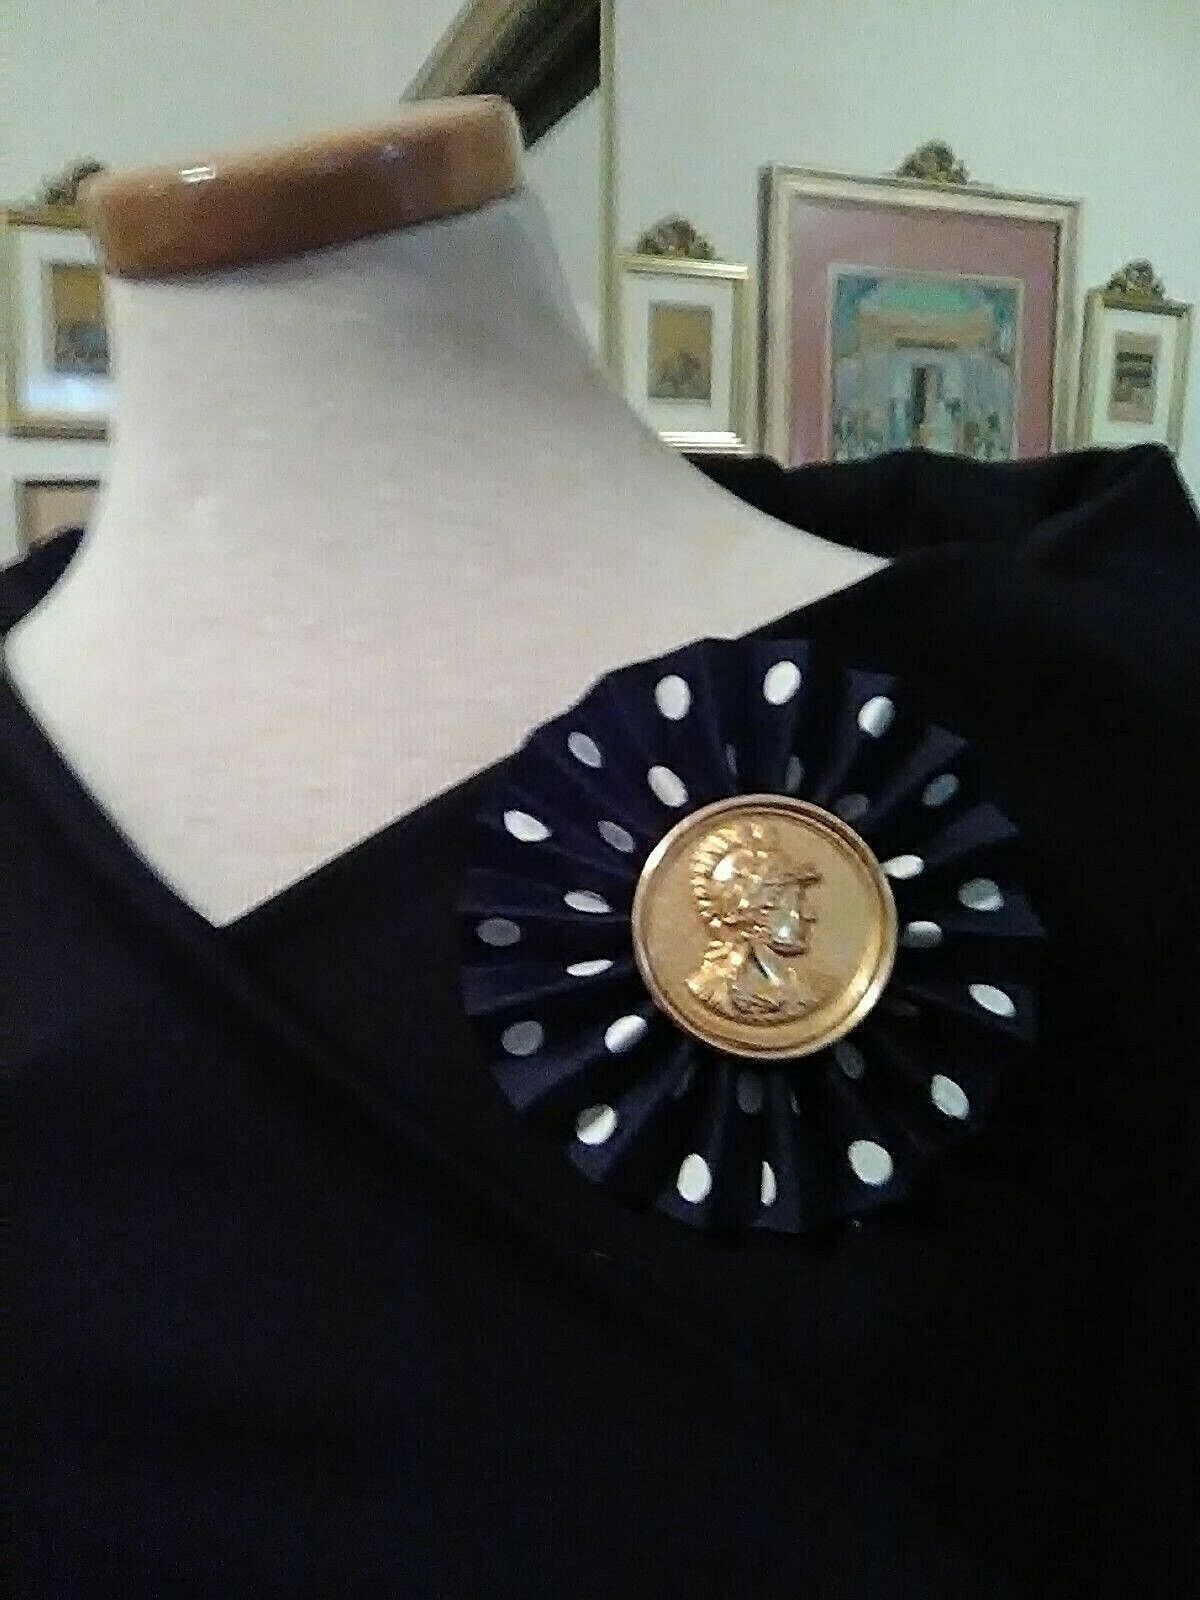 Primary image for VINTAGE GOLDEN PIN BROOCH FAUX ROMAN GOLD COIN PLEATED NAVY WHITE DOT BUNTING